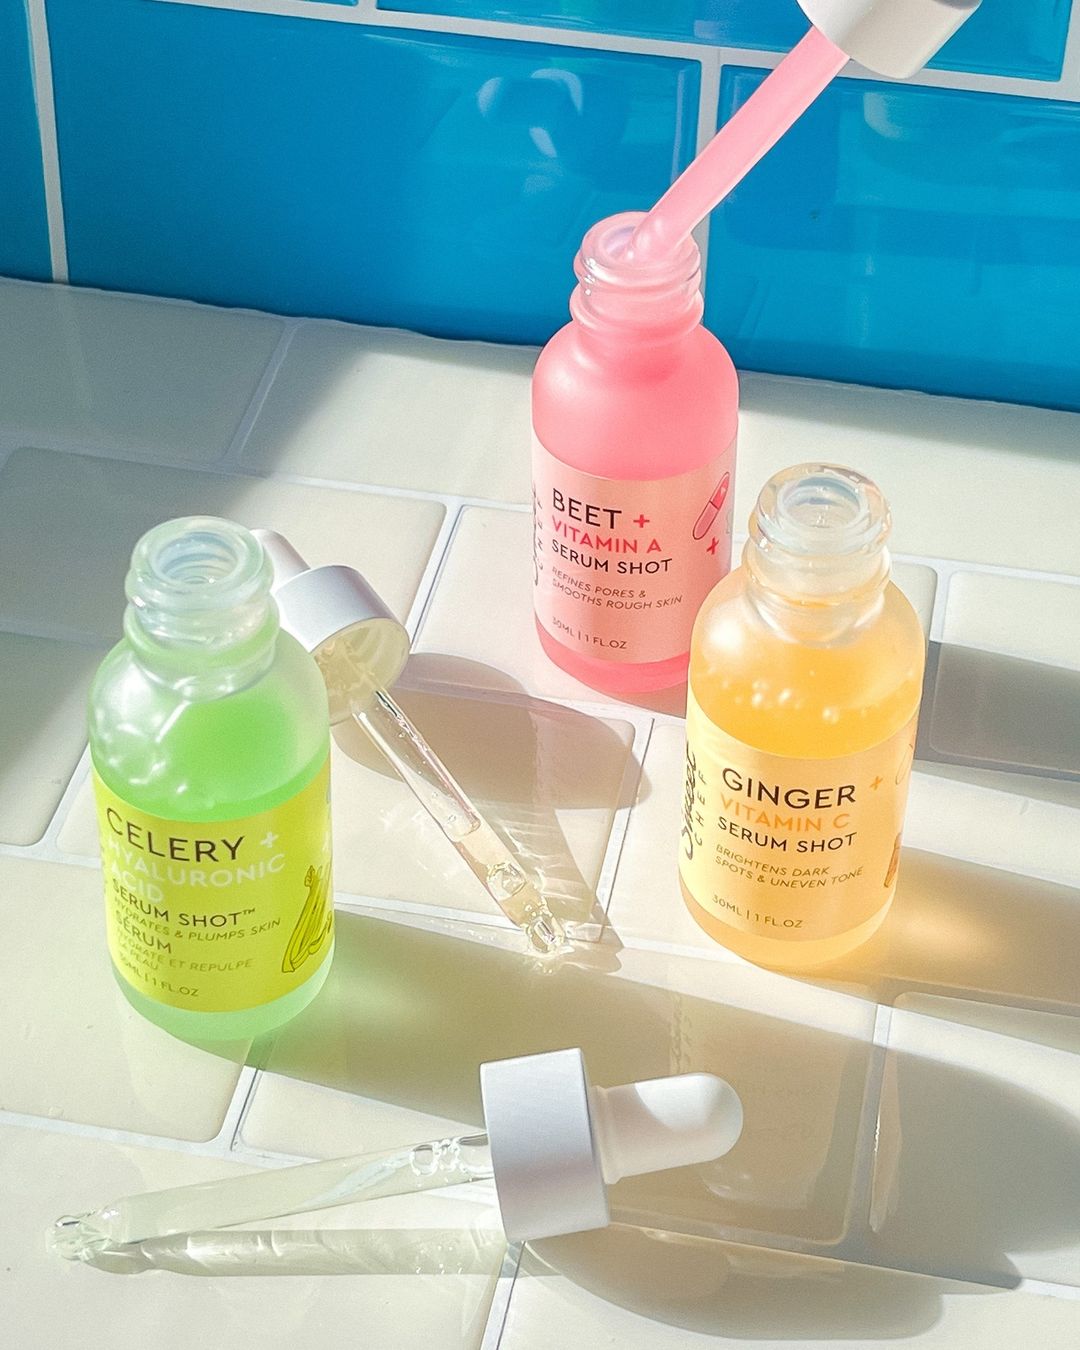 Sweet Chef serums on bathroom counter